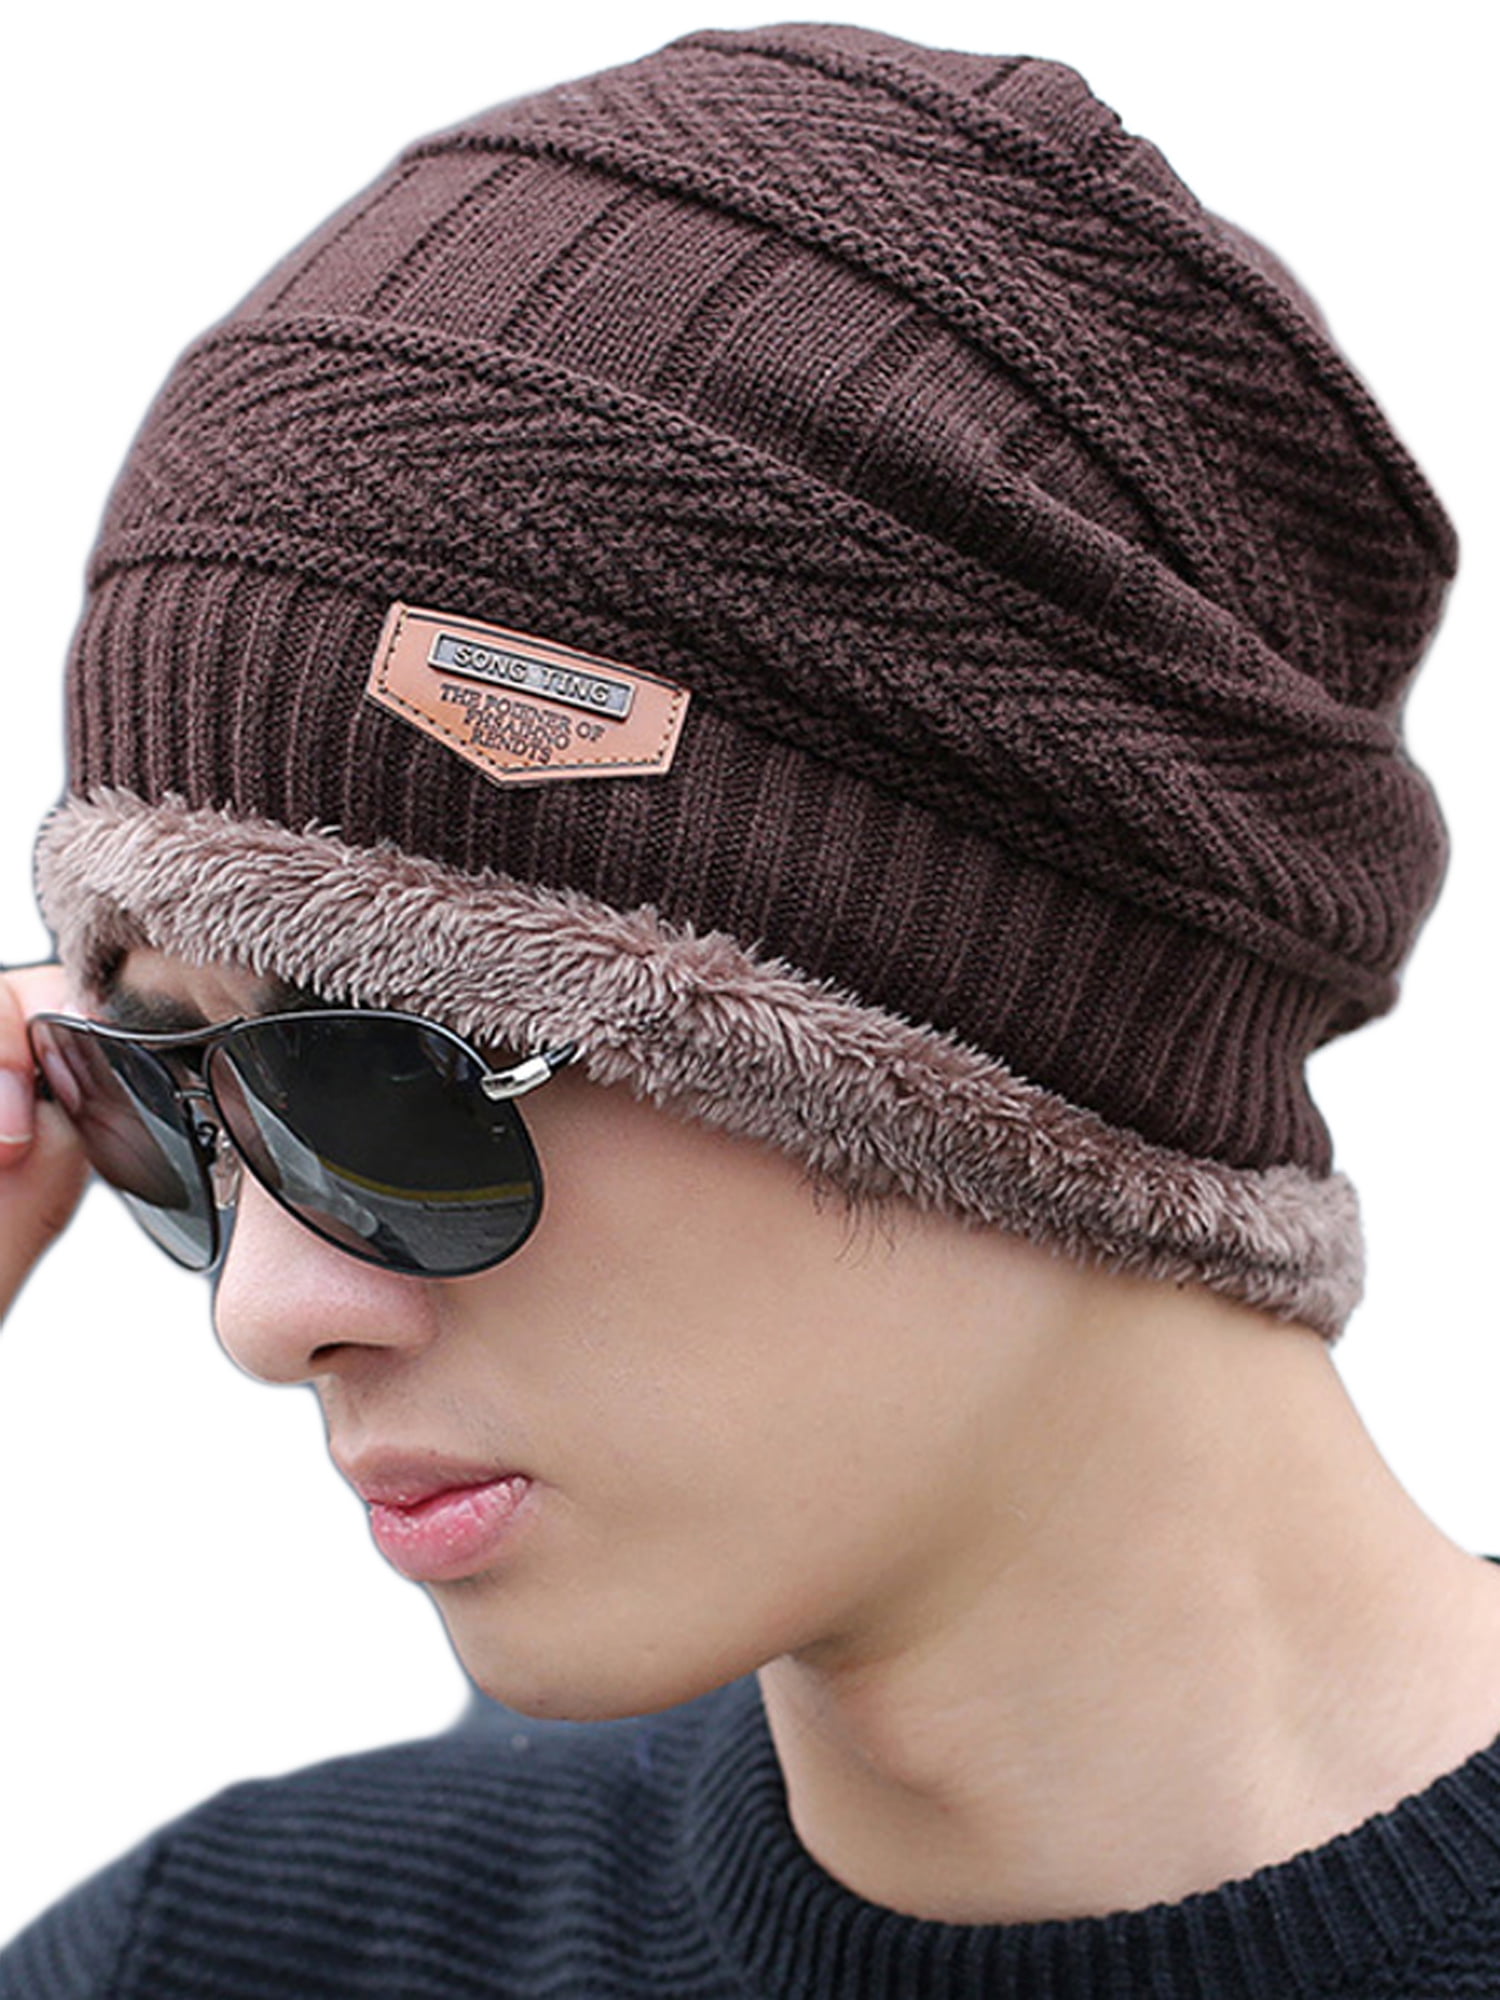 Mens Womens Warm Winter Cotton Knitted Baggy Ski Cap Beanie Slouchy Hat Unisex 